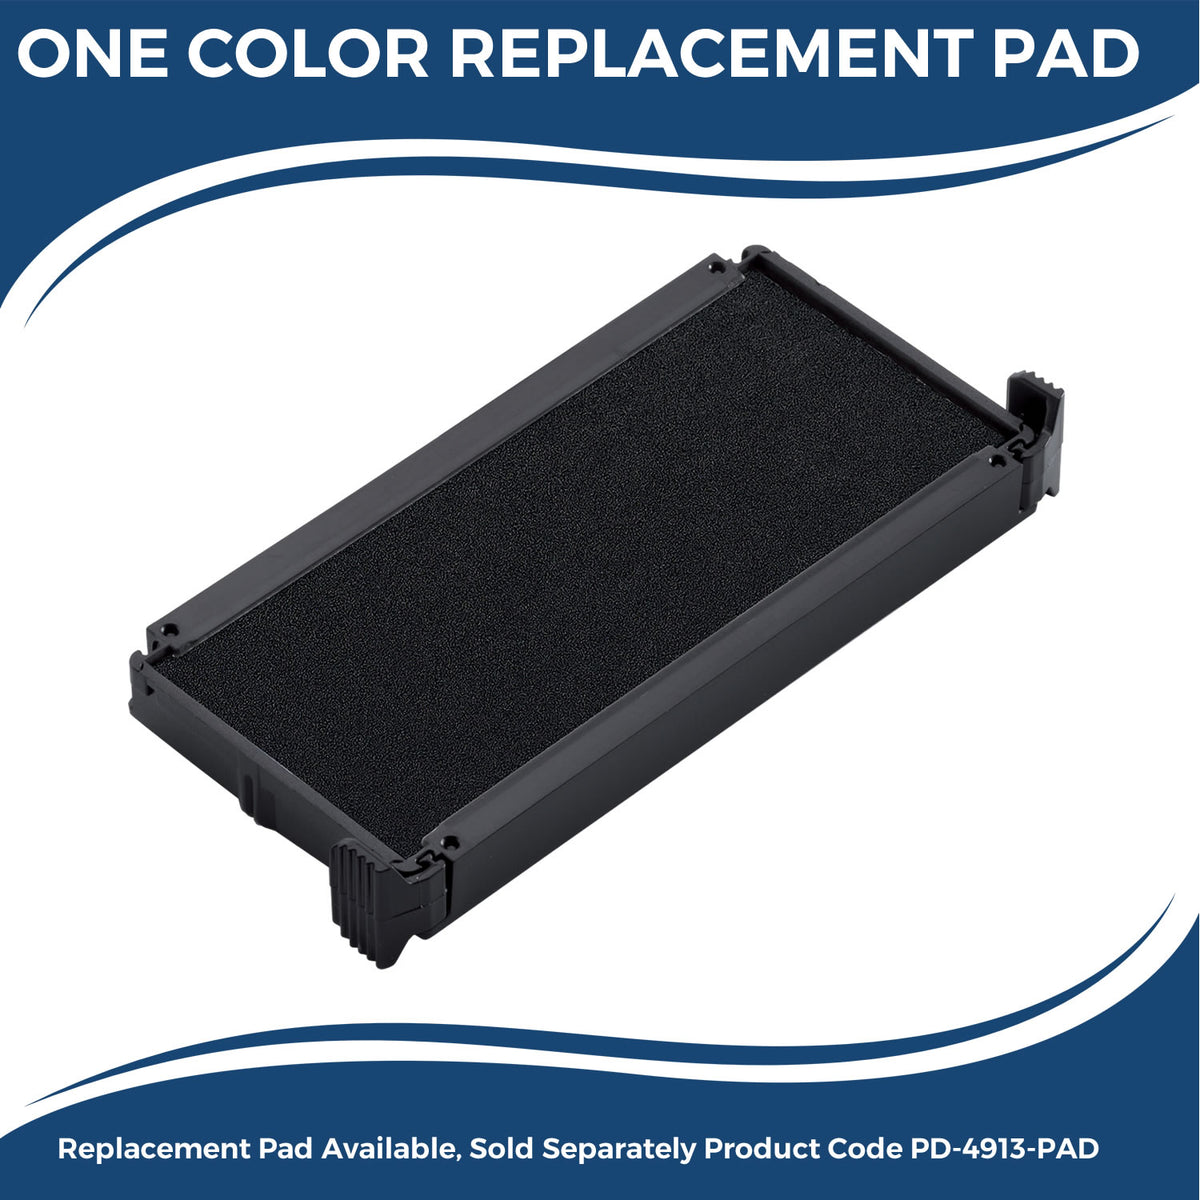 Large Self-Inking Outline Anulado Stamp 5537S Large Replacment Pad